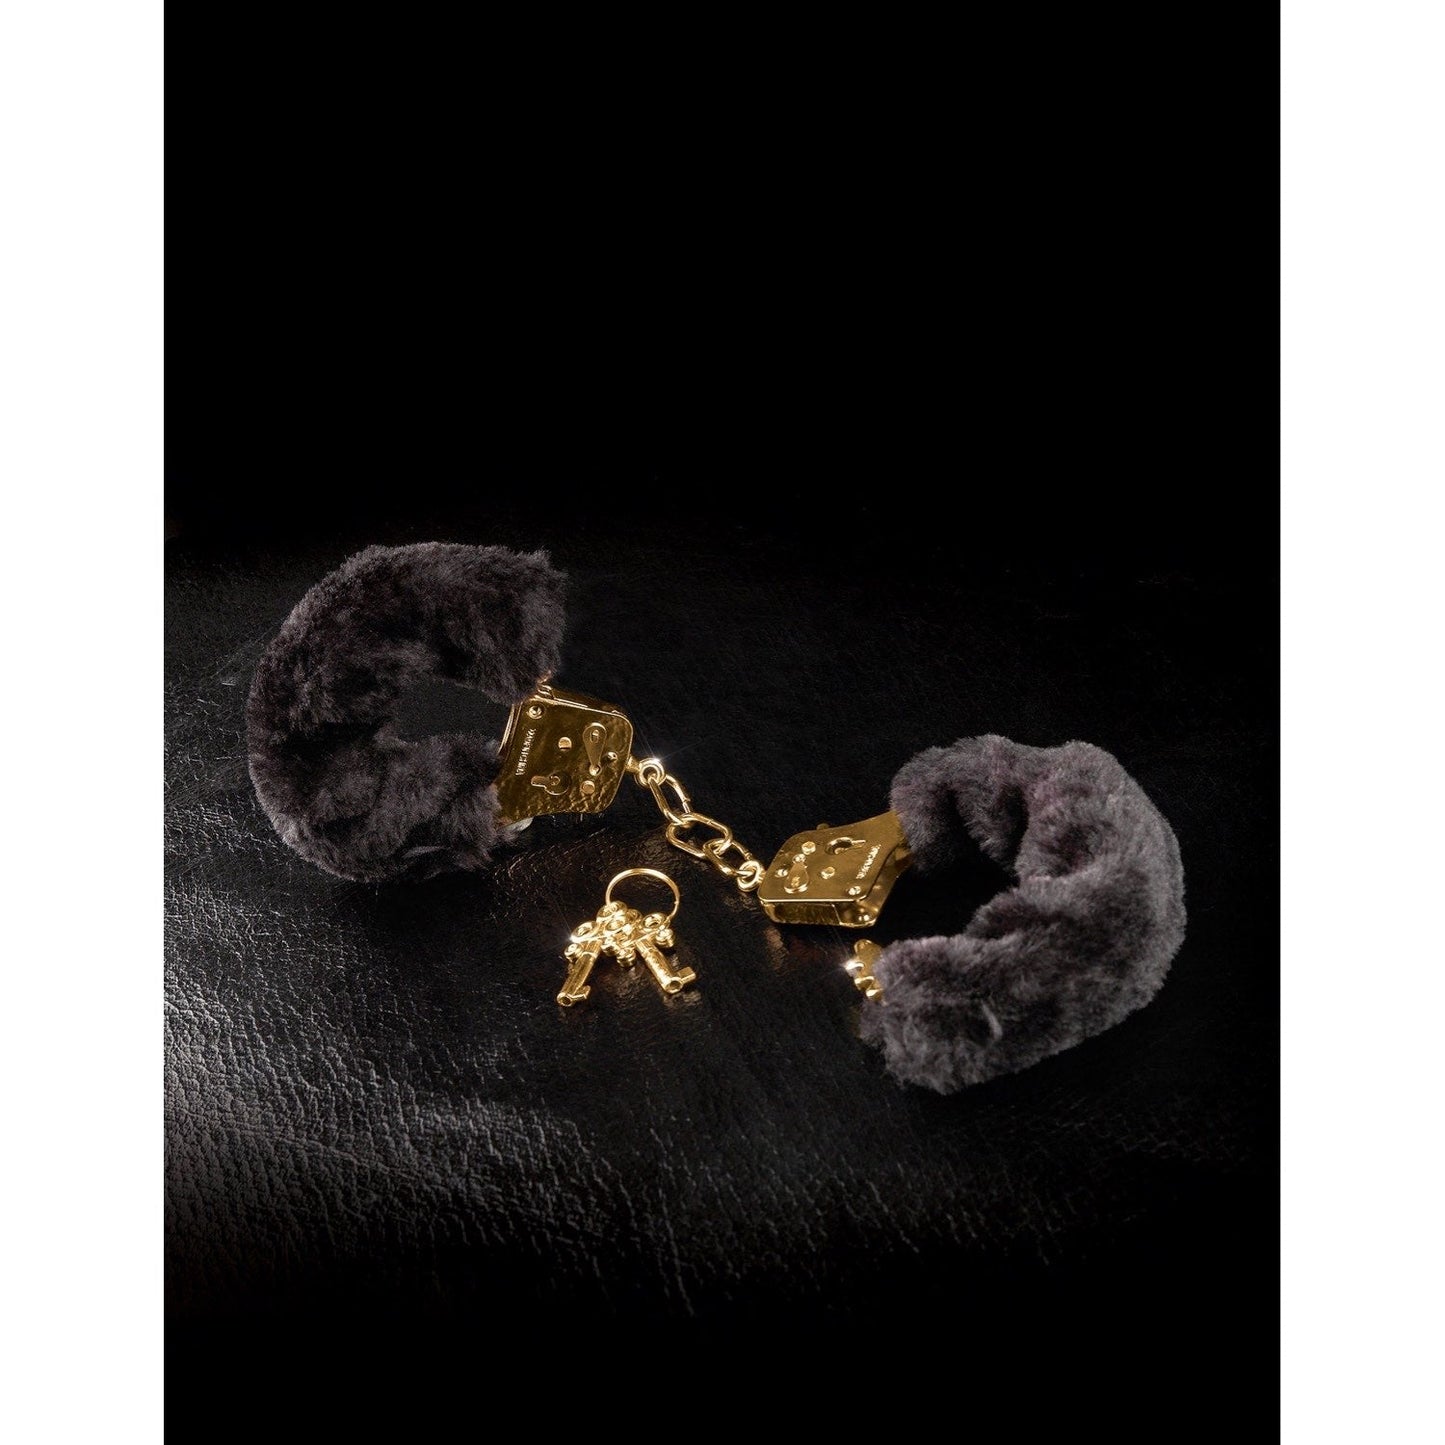 Deluxe Furry Cuffs - Black/Gold Furry Restraints